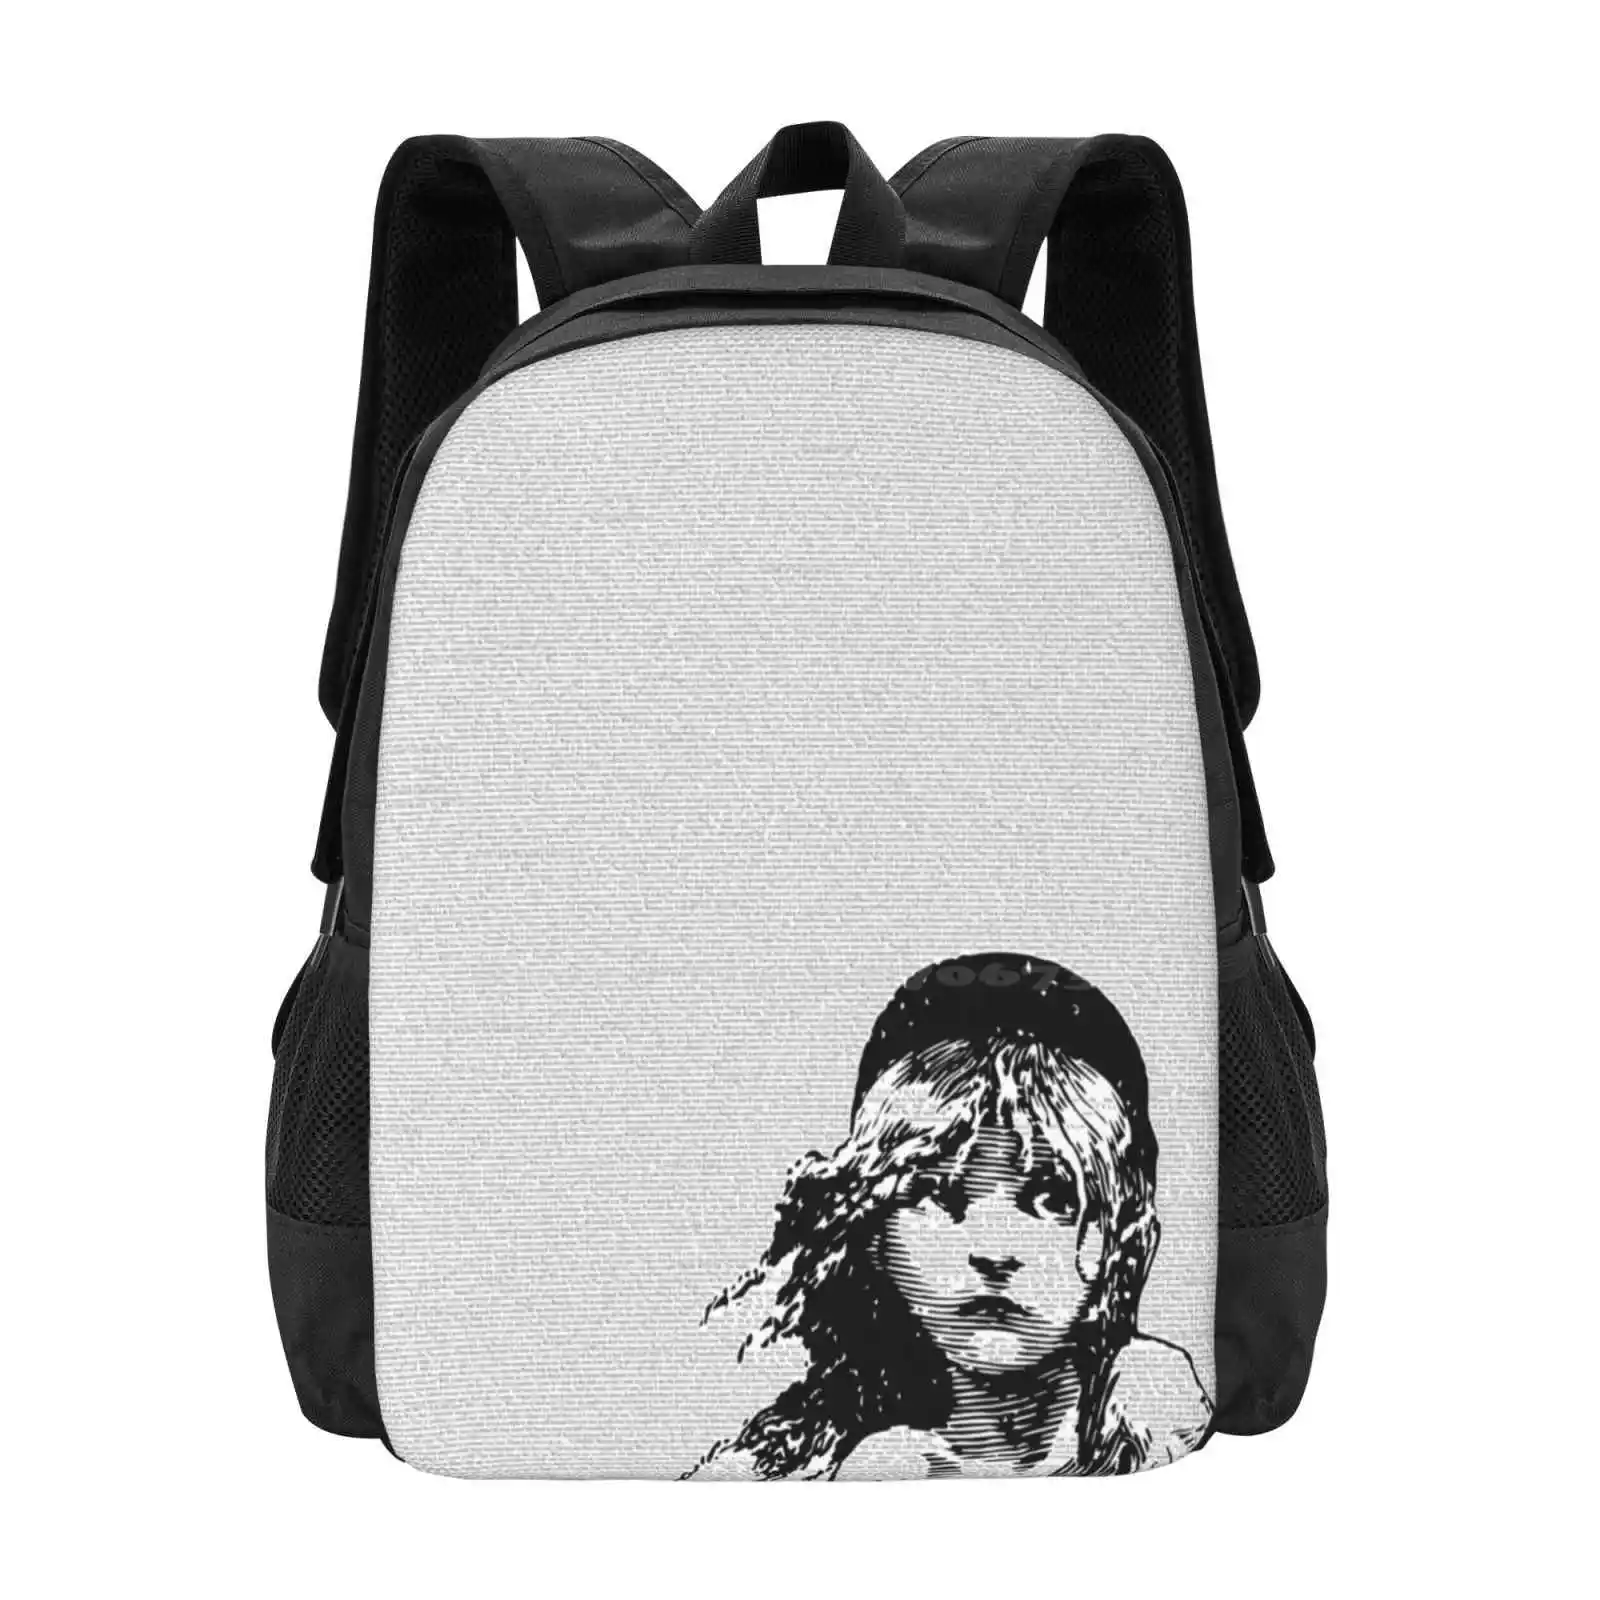 

Les Miserables Musical Full Script Lyrics Hot Sale Backpack Fashion Bags Les Miserables Broadway Musical Script Lyric Wicked